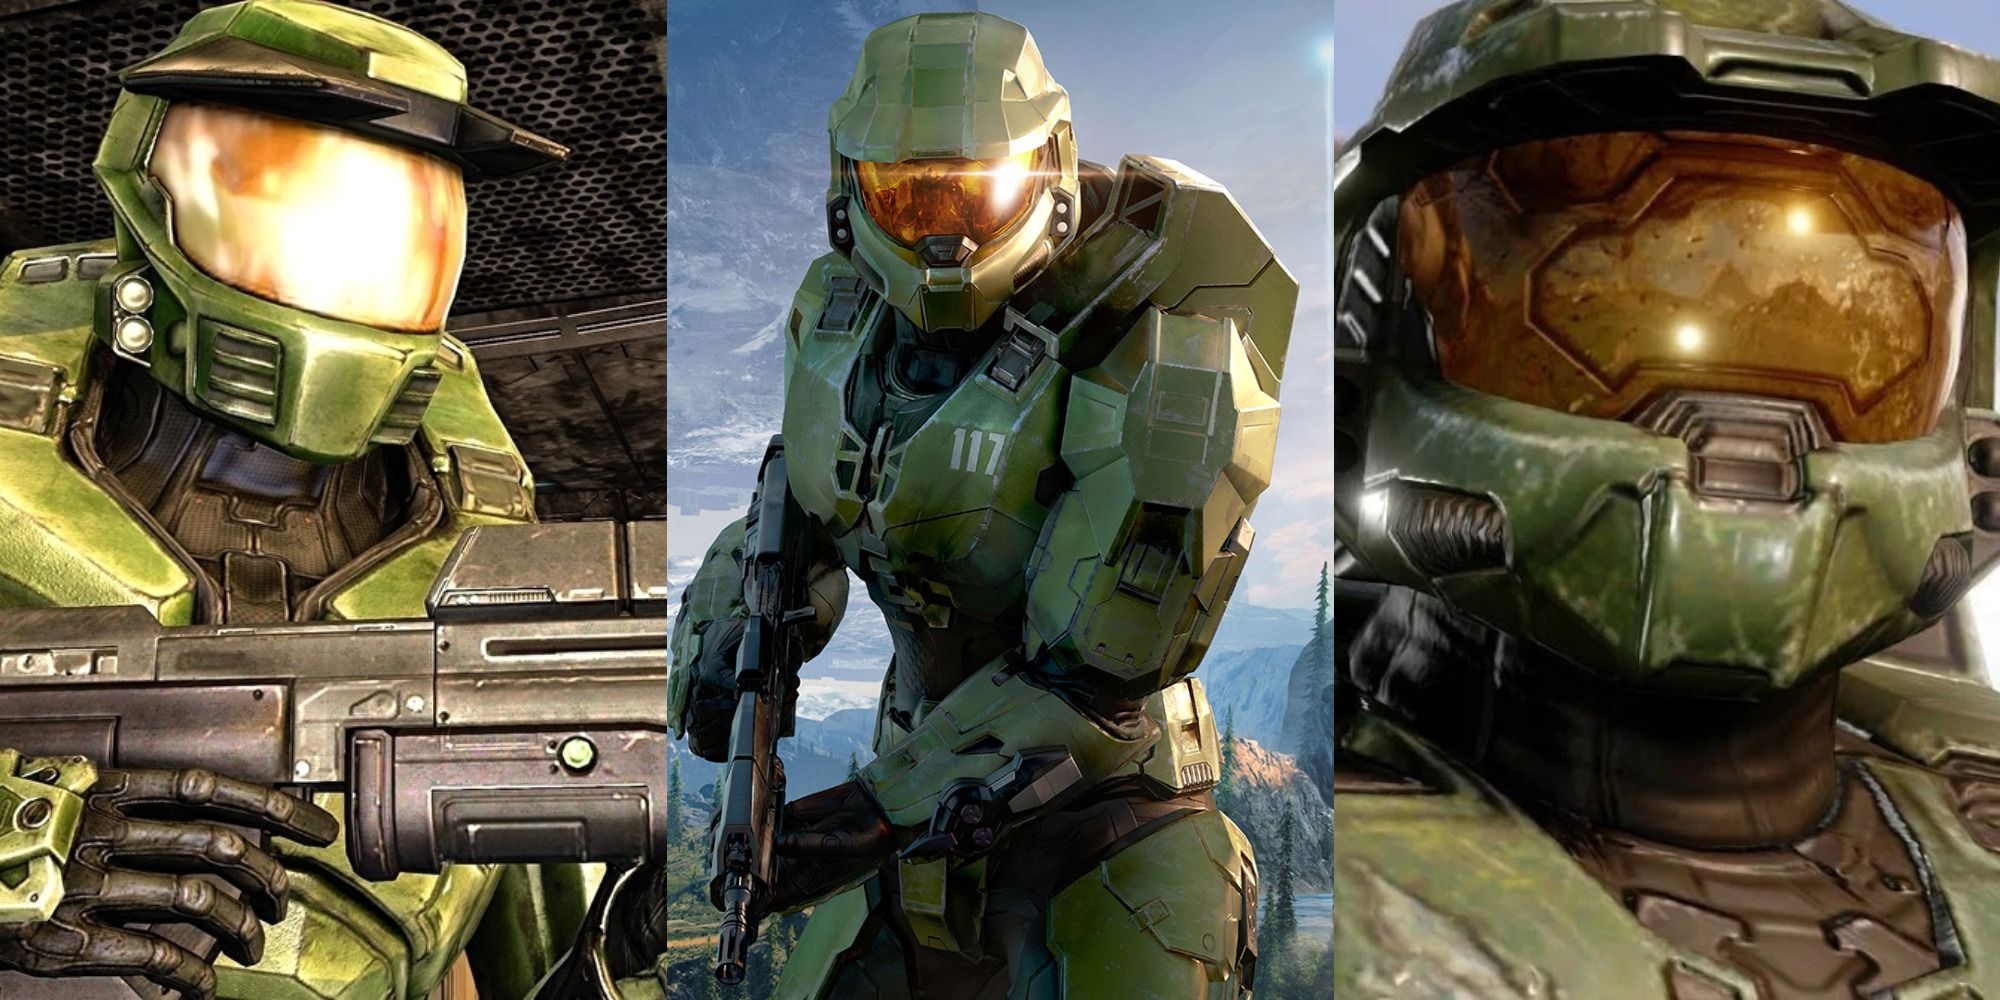 Three versions of master chief from halo